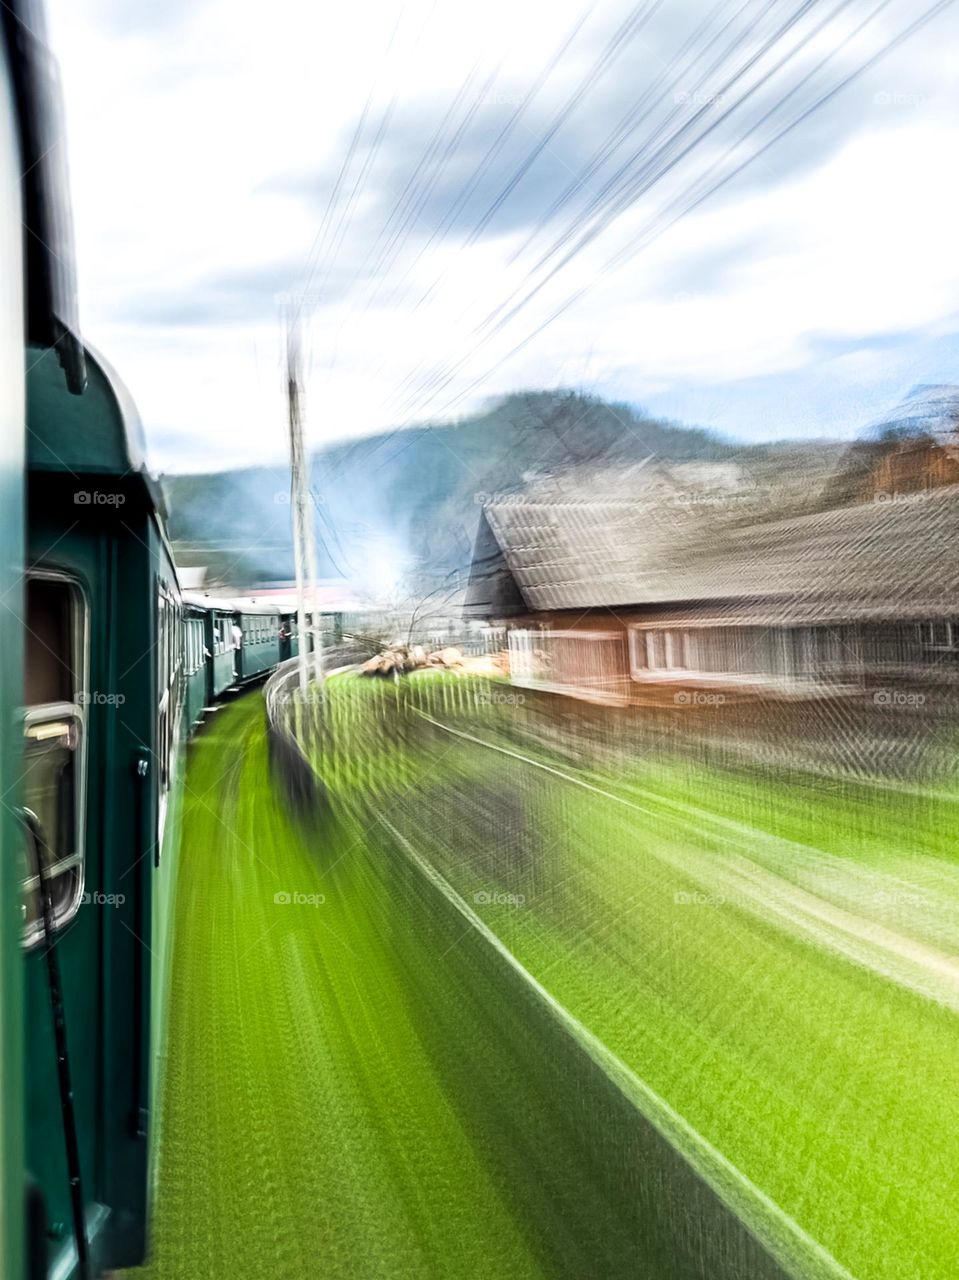 Long exposure shot from a moving train 